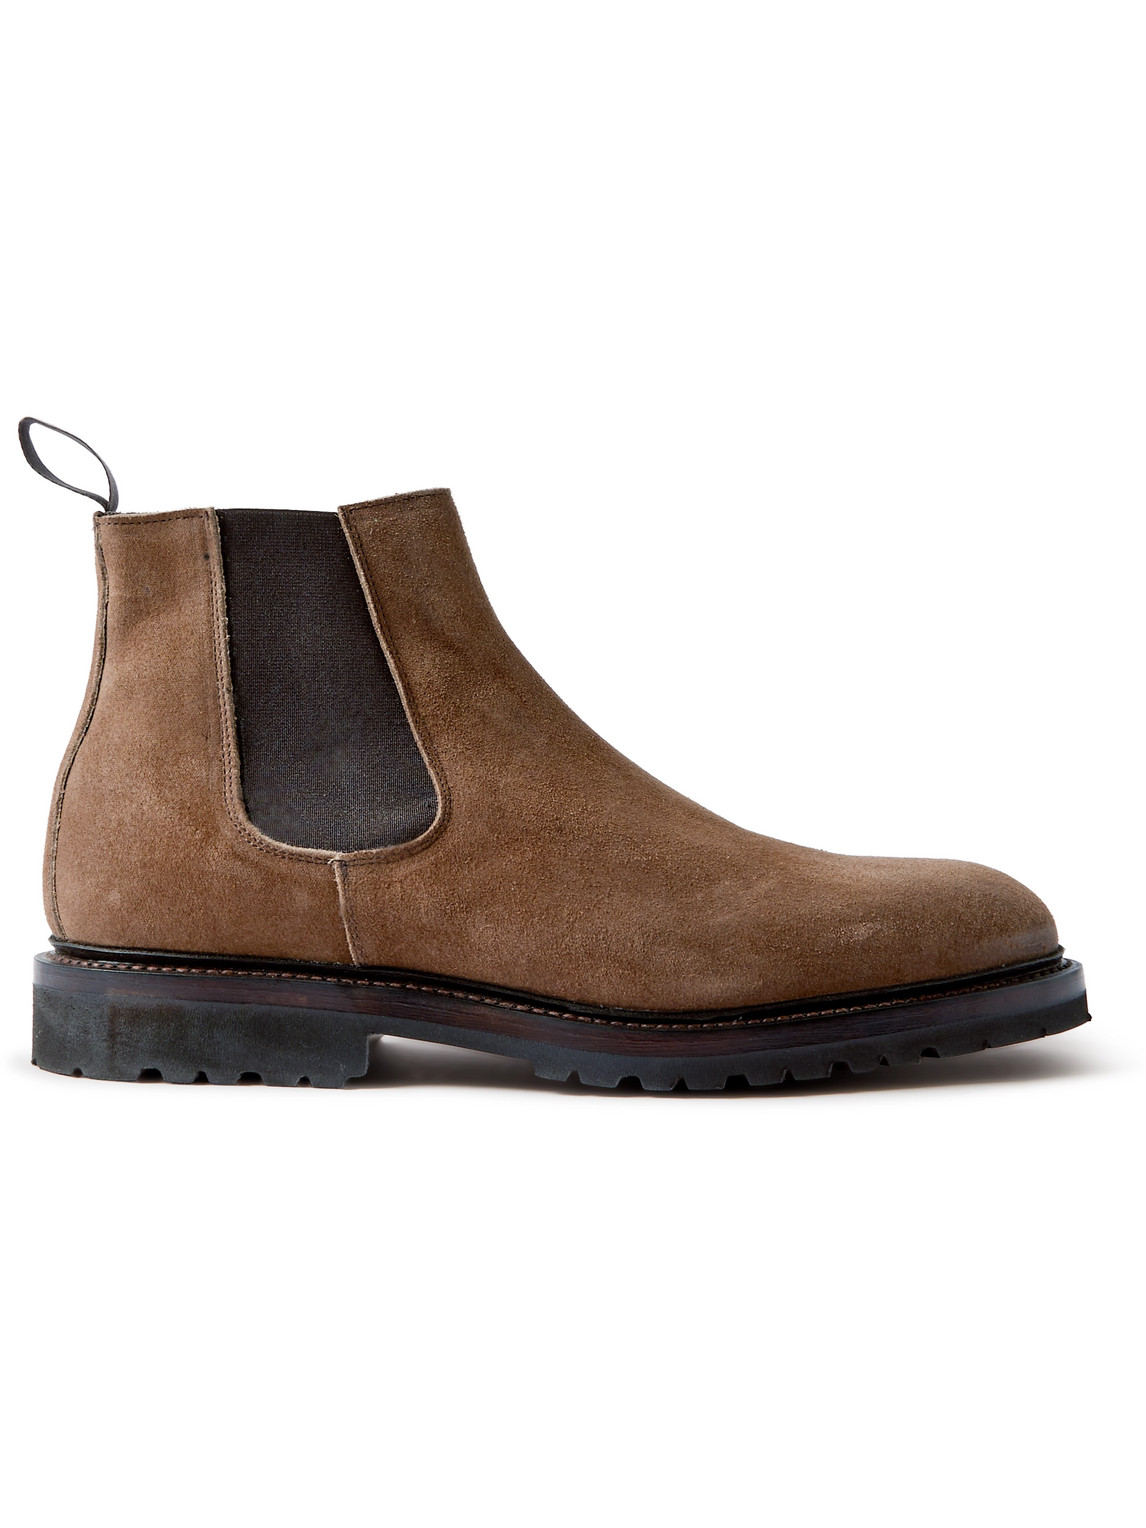 George Cleverley Jason 2 Suede Chelsea Boots In Brown